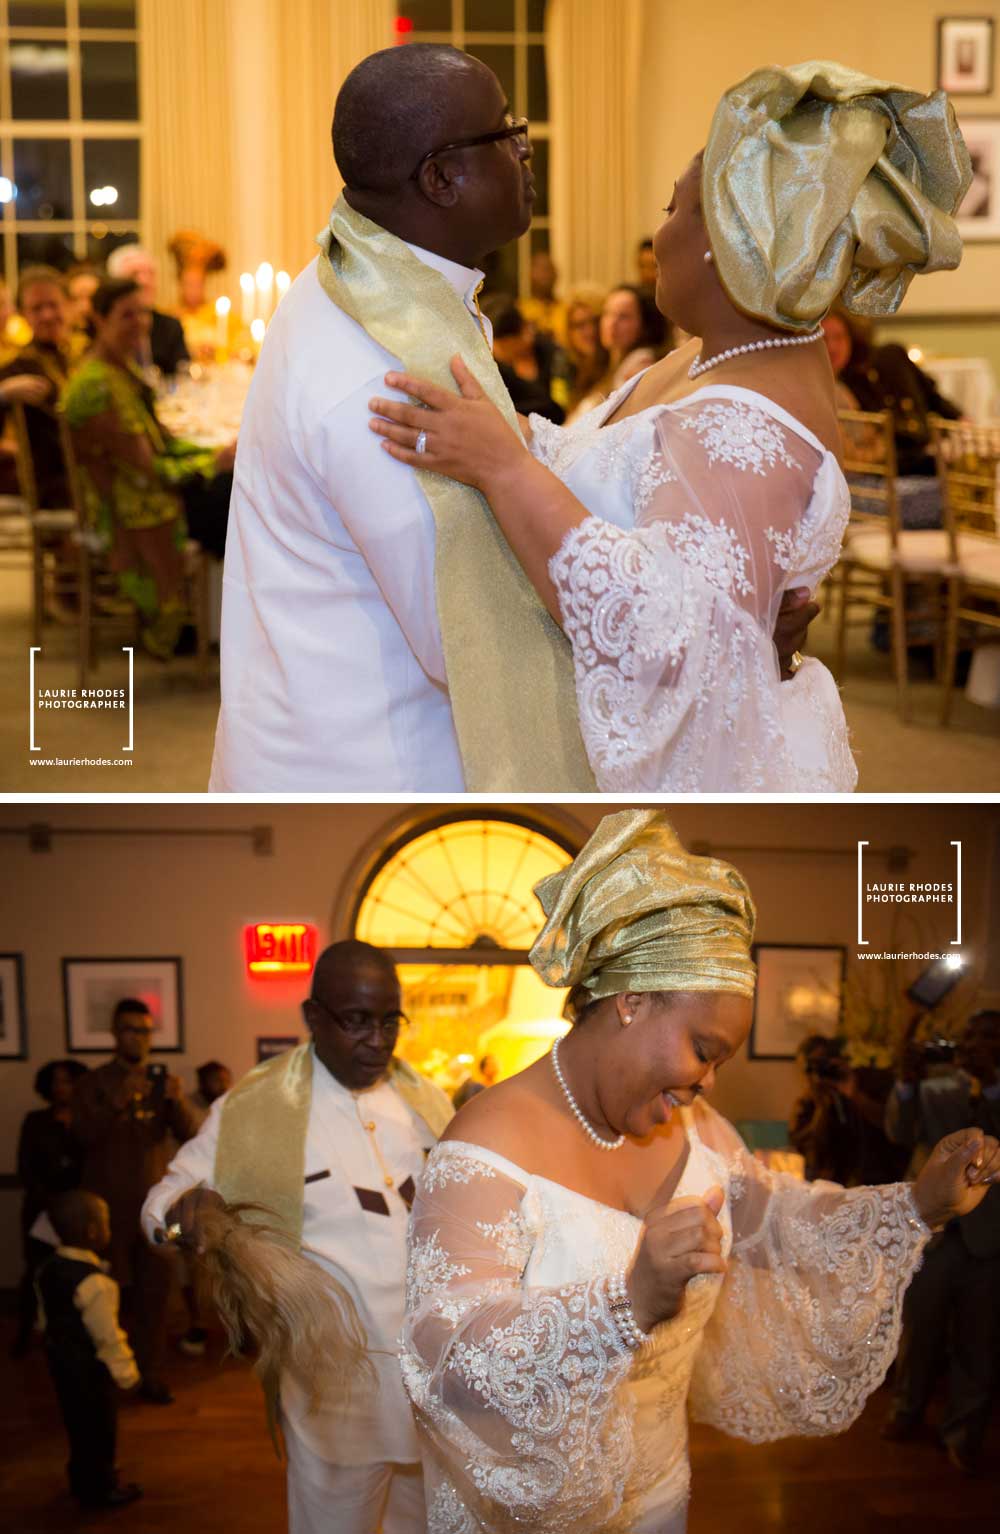 Wedding Pictures of A Hero and Her Family #5 - Nobel Peace Prize Winner Leymah Gbowee Marries Jay Fatorma